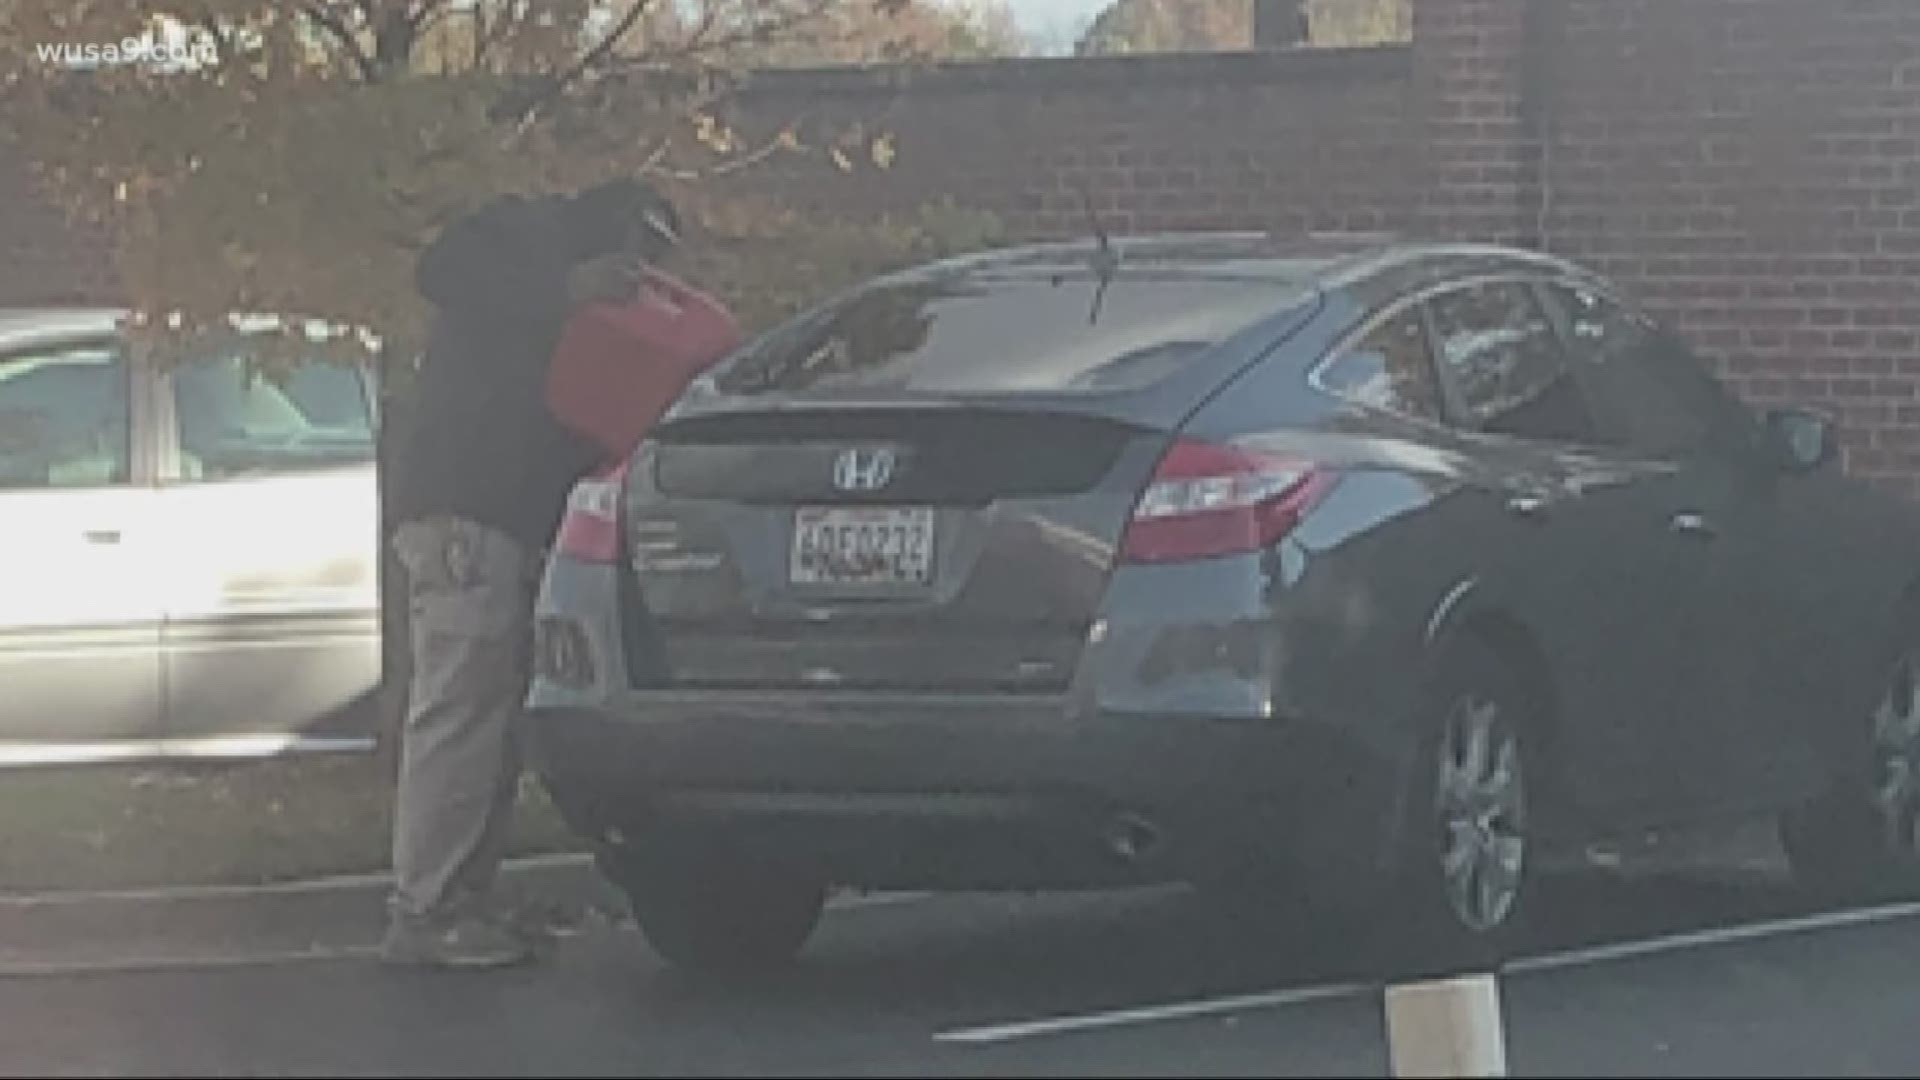 A man was spotted pouring gas into his car at a Chick Fil A. There were no gas pumps in site, just a man improvising a gas fill up at a fast-food restaurant.